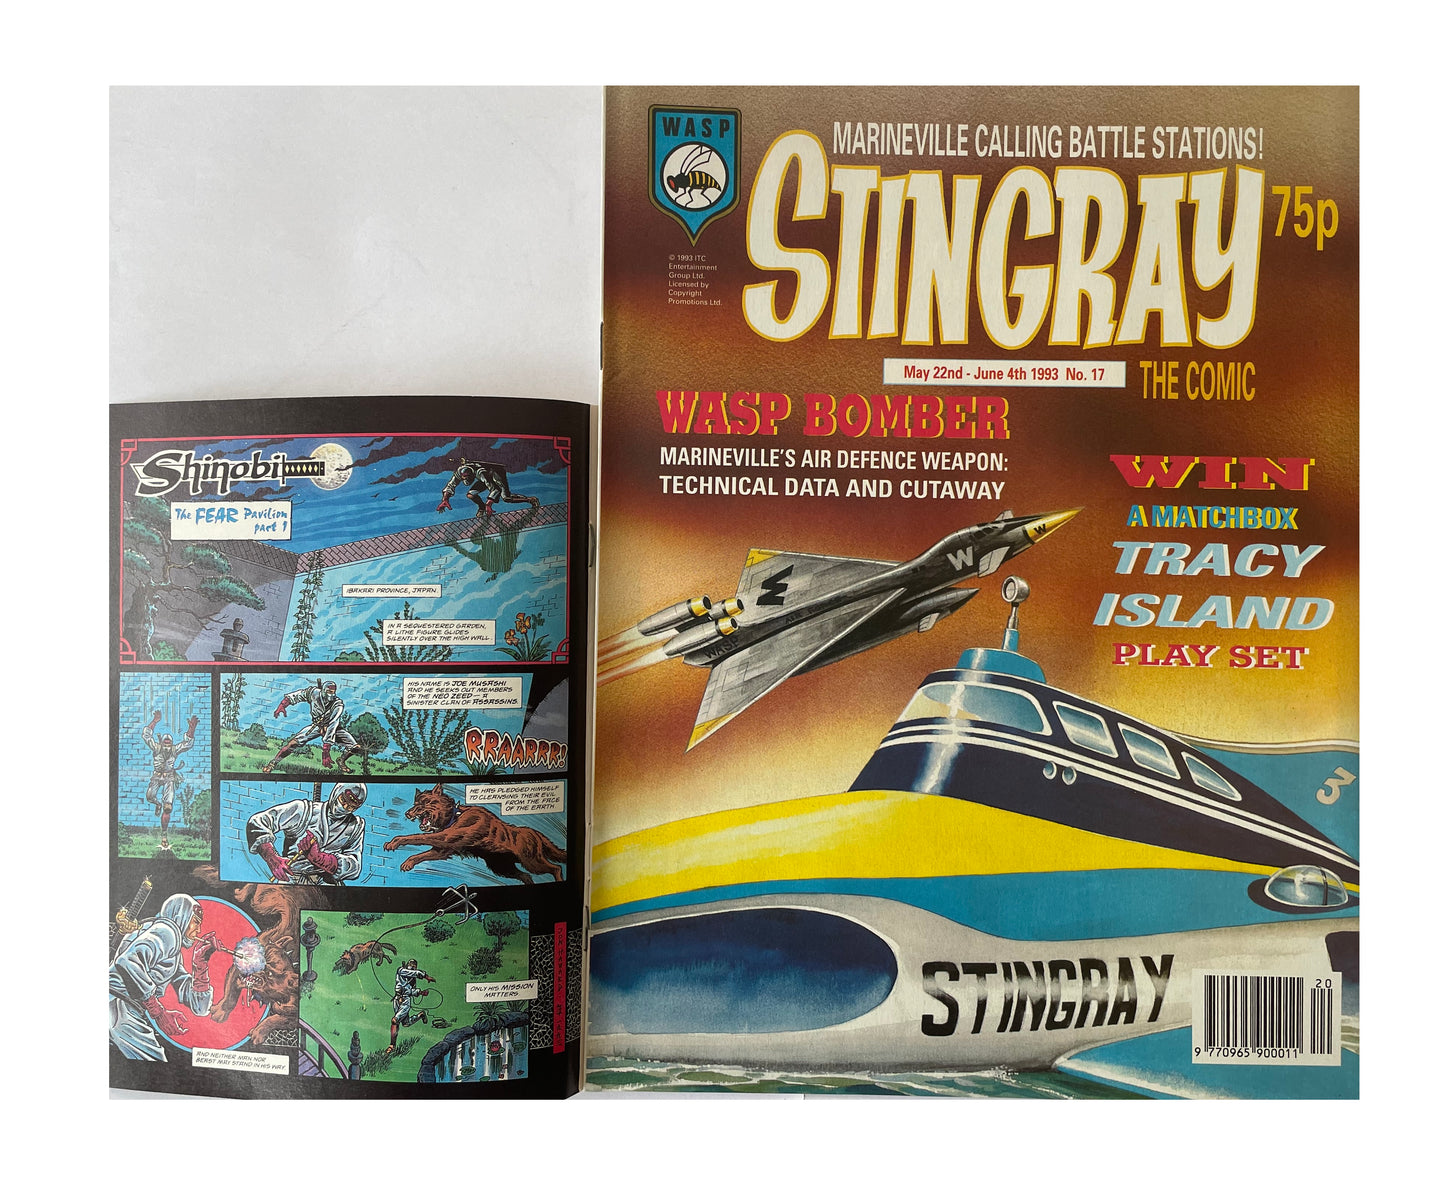 Vintage 1993 Gerry Andersons Stand By For Action... Stingray The Comic Issue No. 17 - May 22nd To June 4th - Free Somic The Comic Preview Special - Brand New Shop Stock Room Find